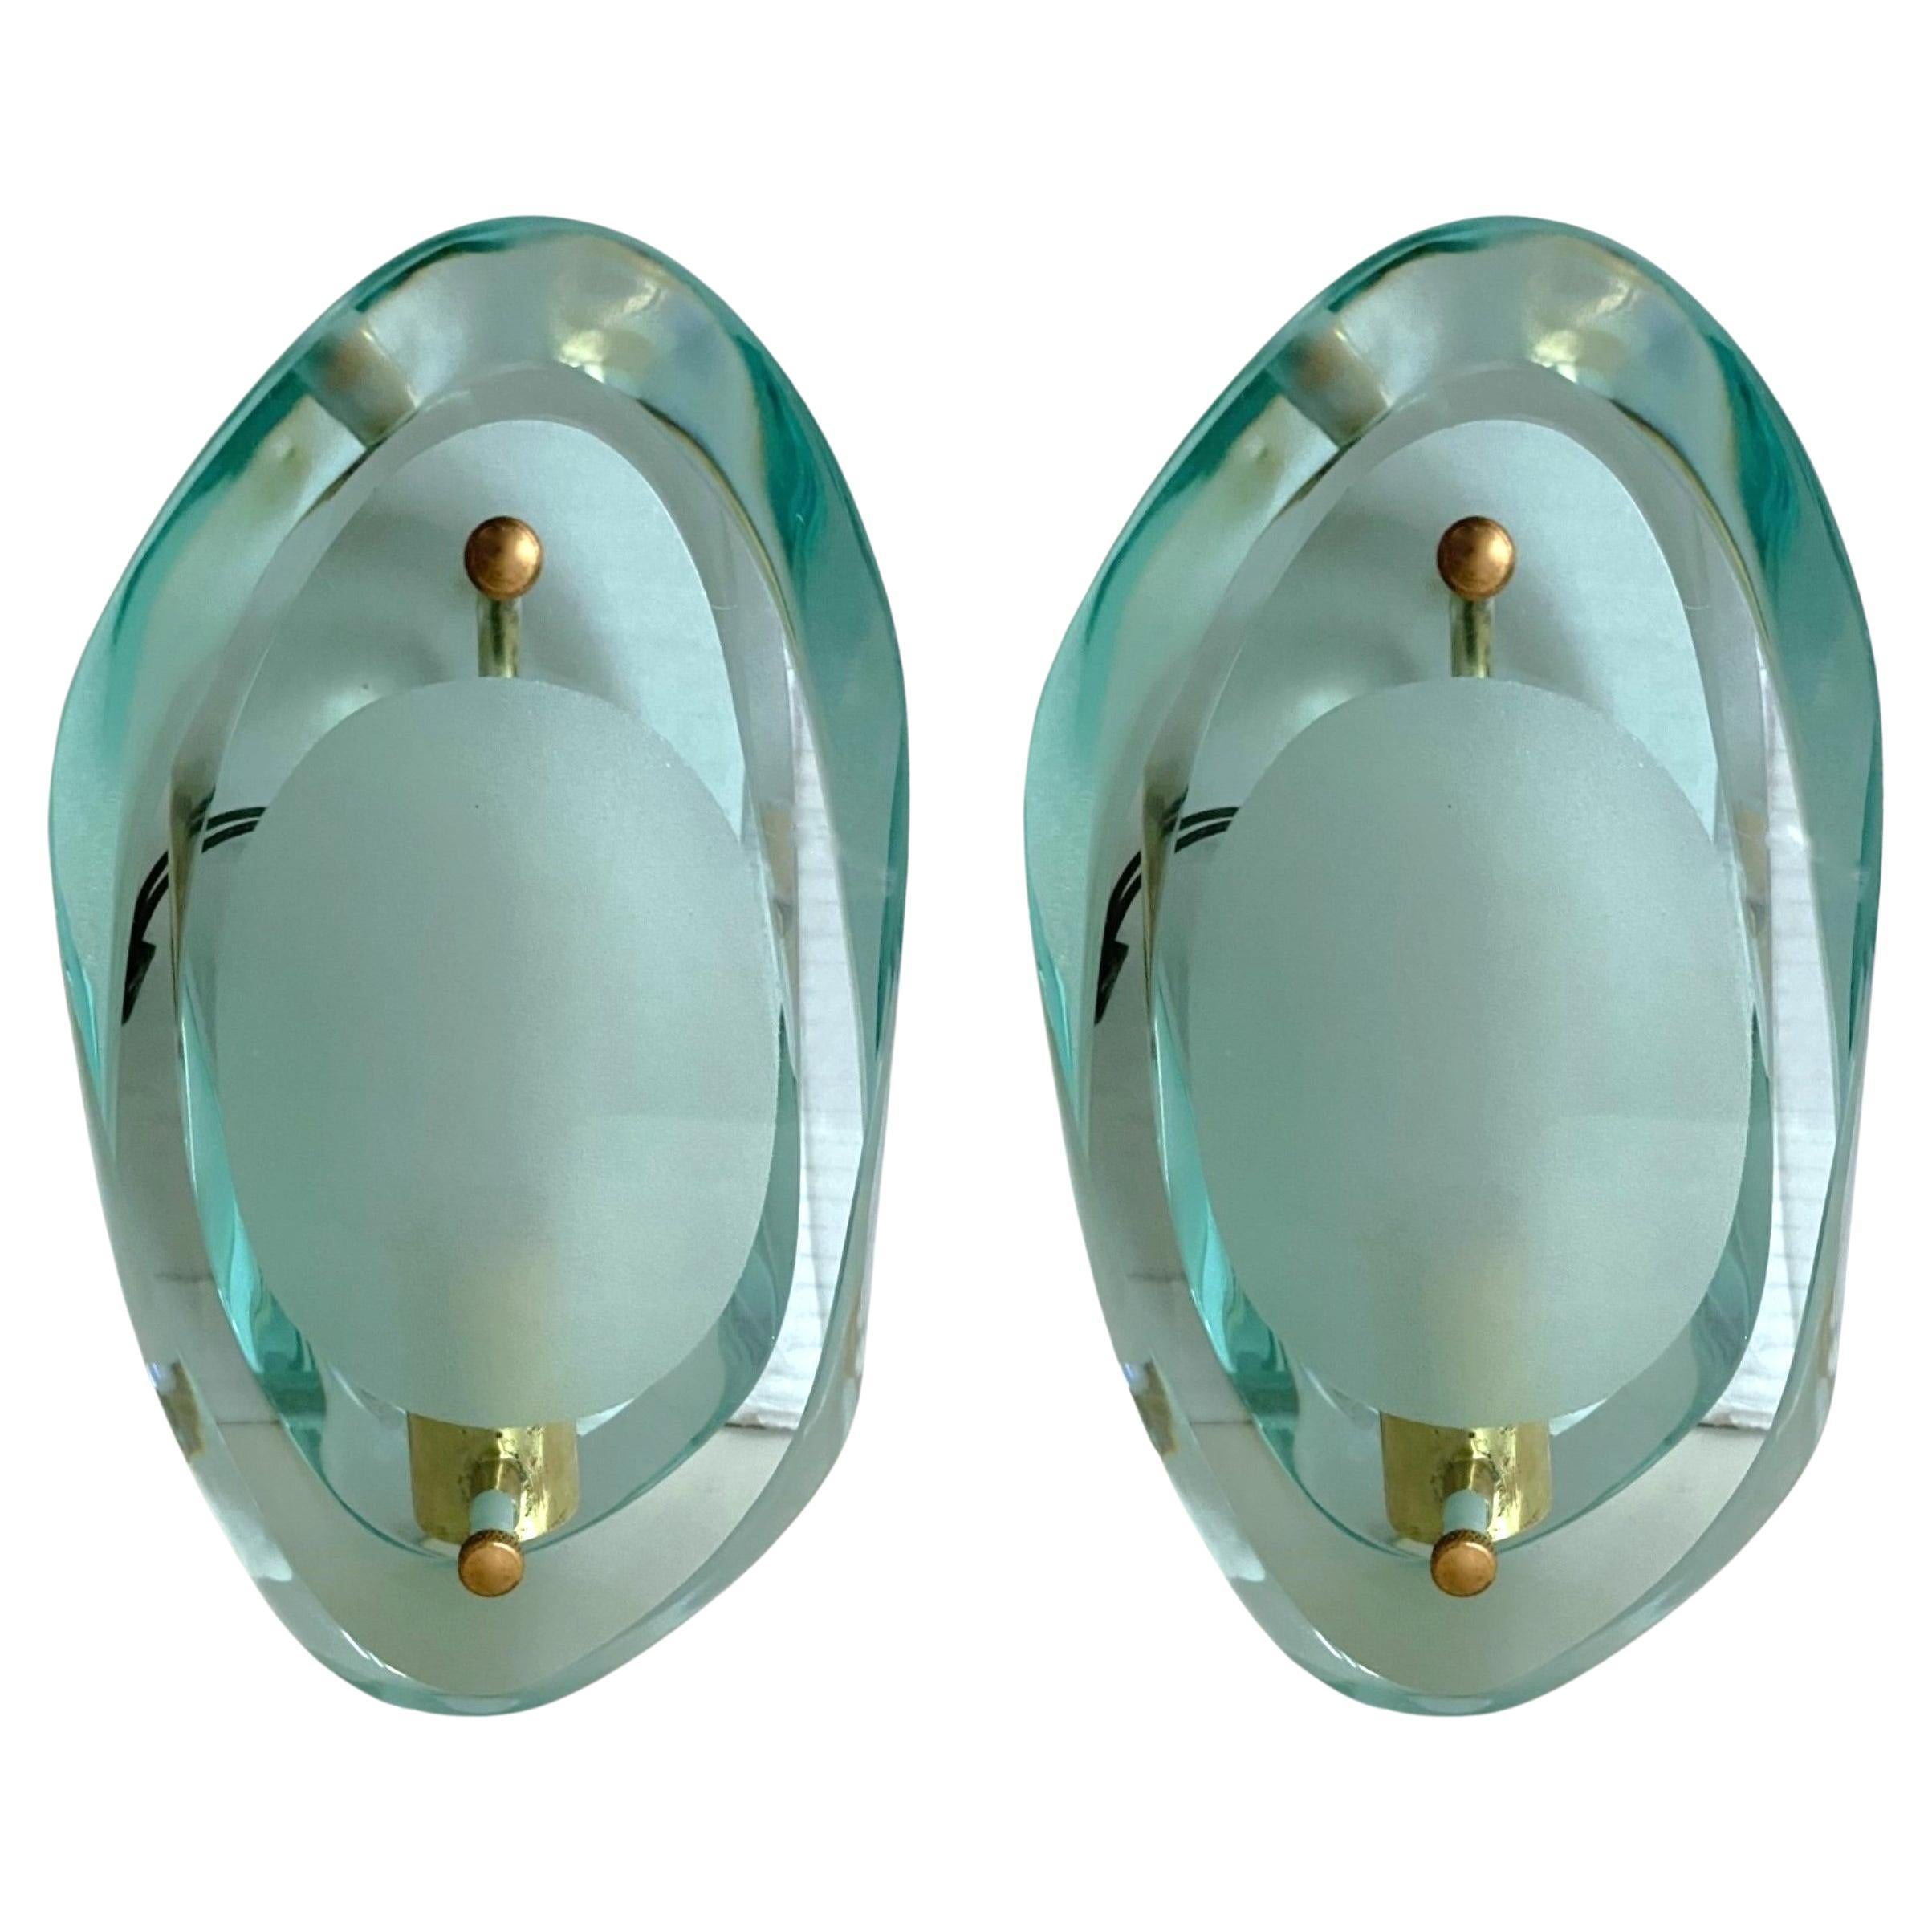 Pair of Max Ingrand Wall Lights Sconces for Fontana Arte Model 2093, Italy, 1961